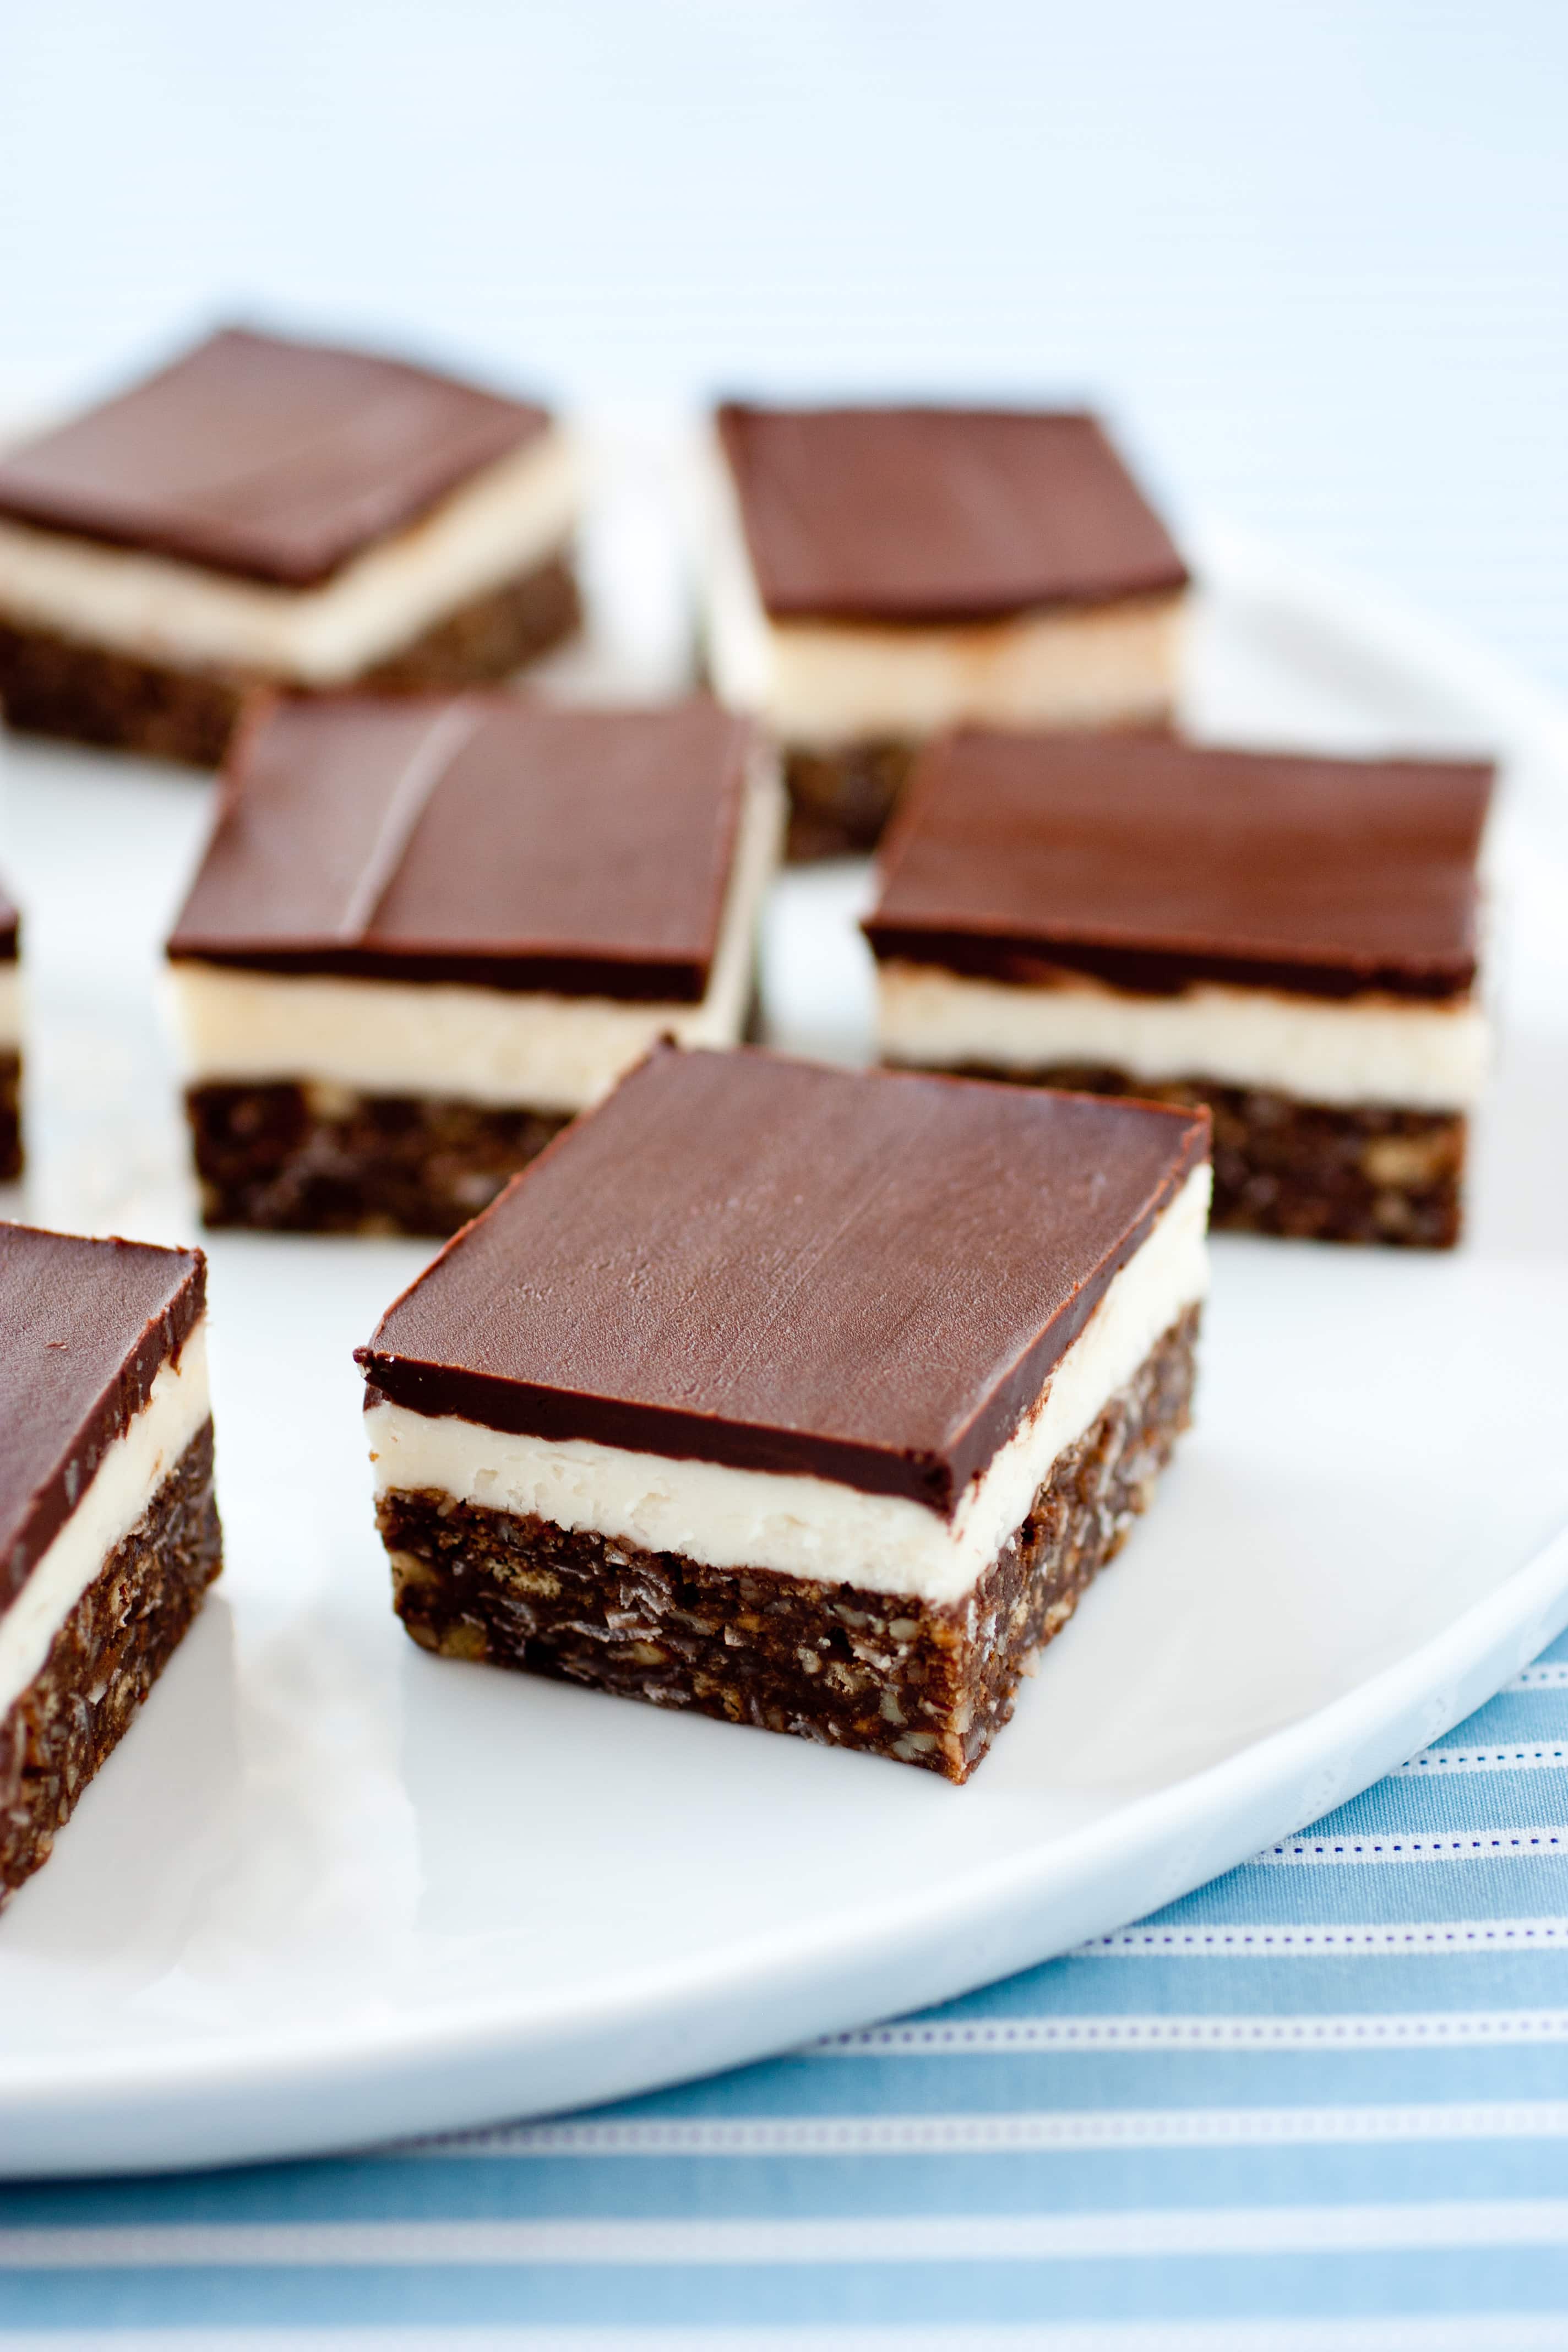 Nanaimo Bars shown on a white serving platter set over a blue striped cloth.